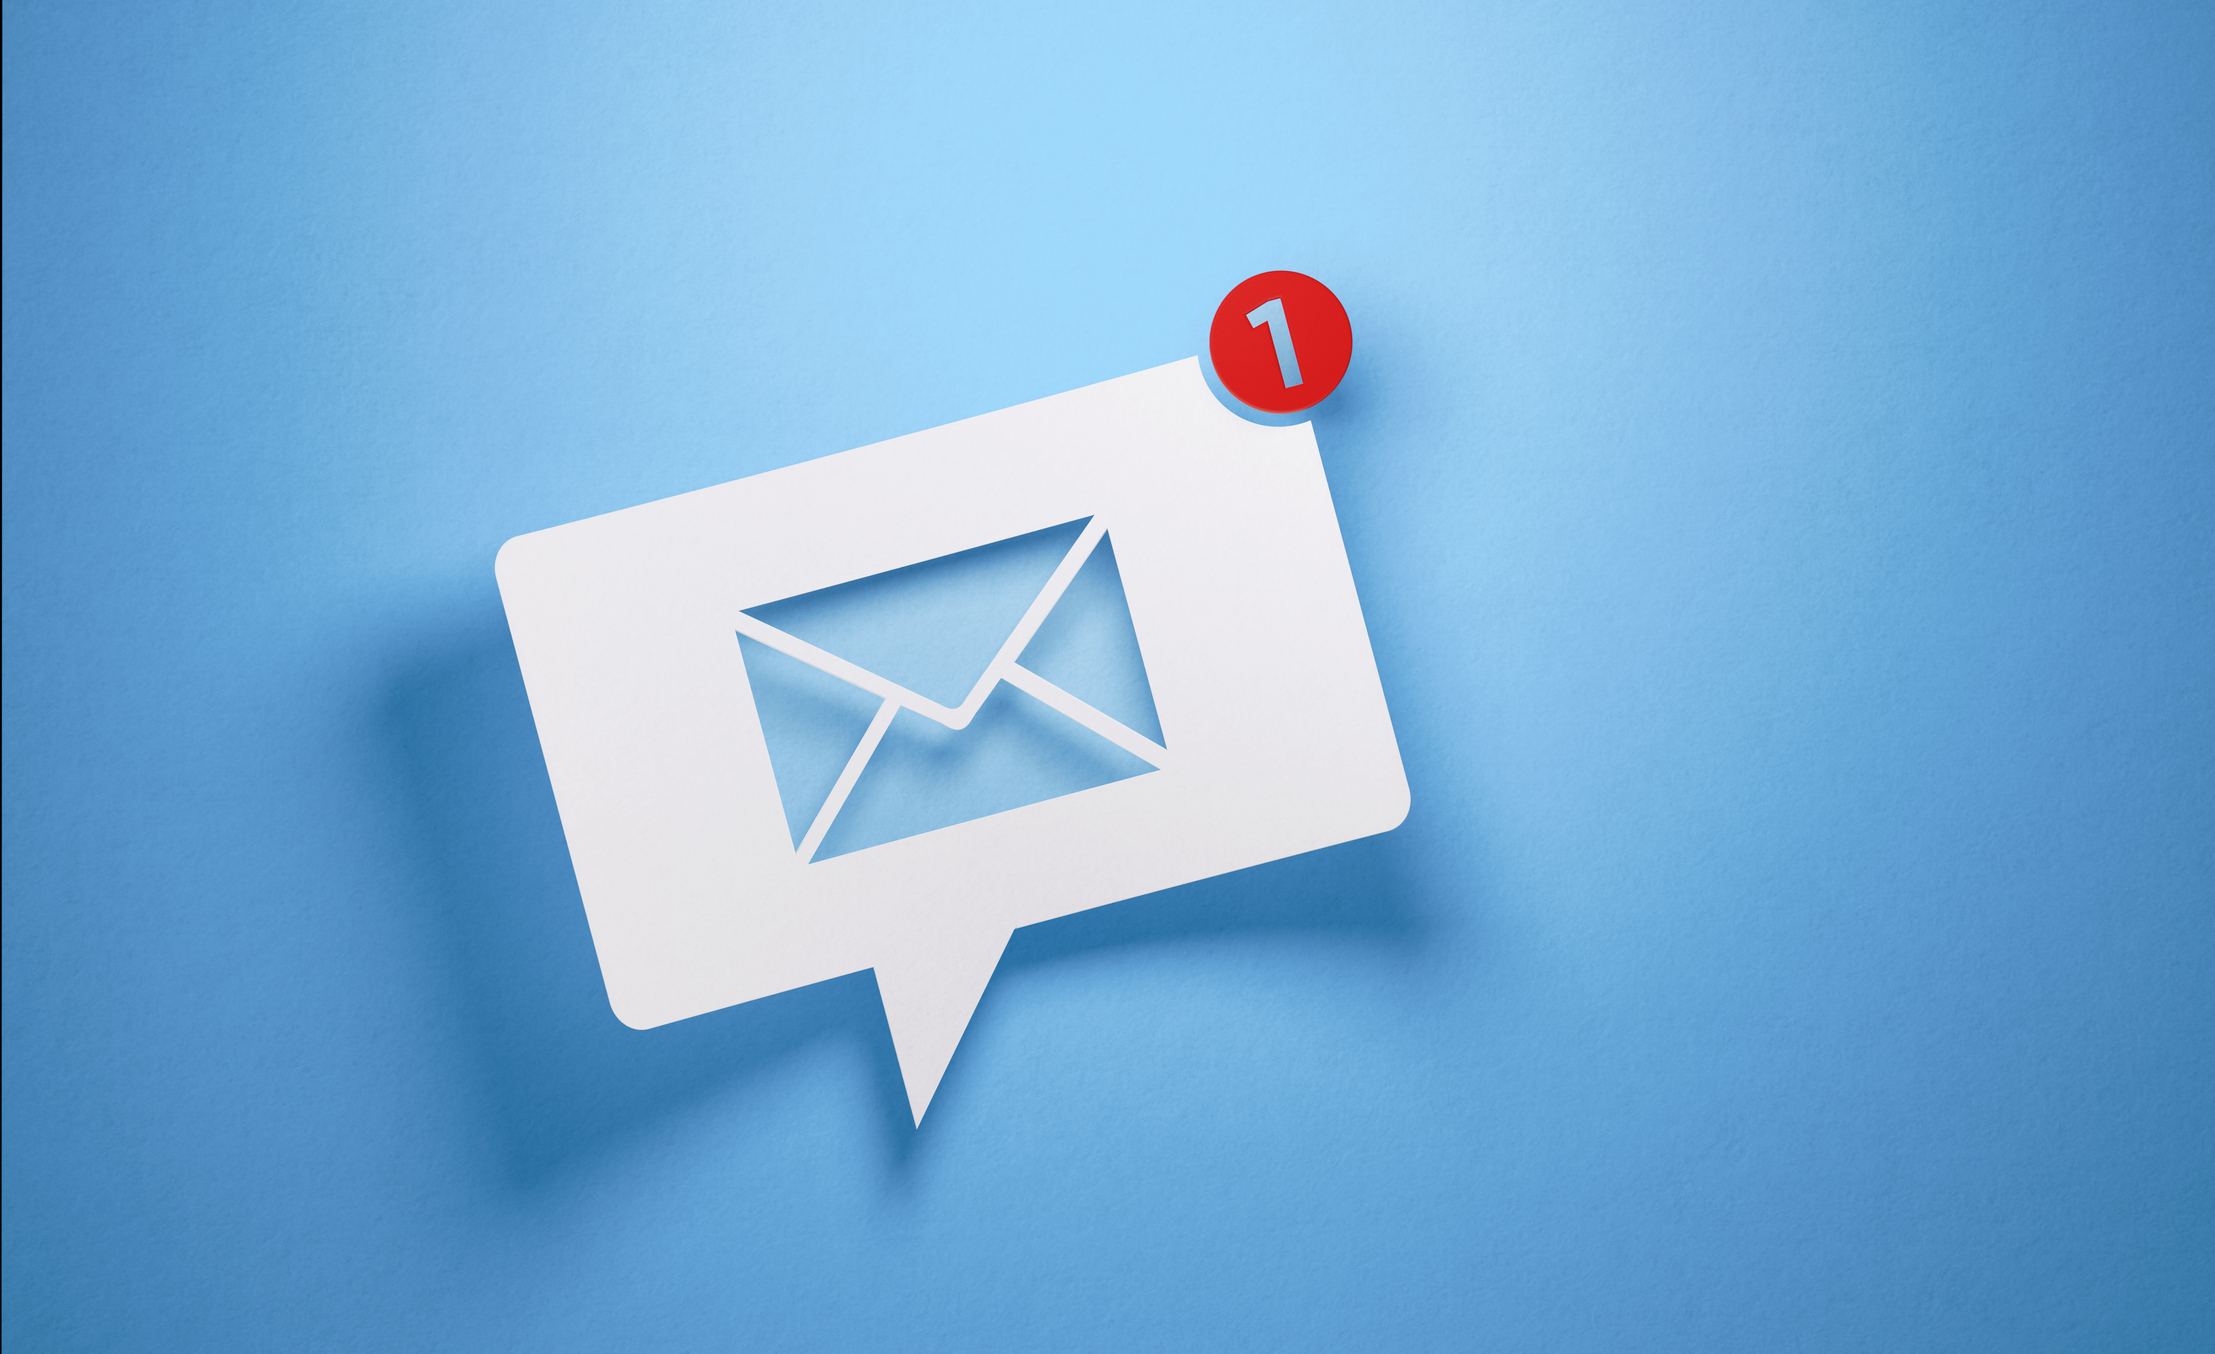 White chat bubble with email symbol on blue background to symbolize email services provided. Horizontal composition with copy space.